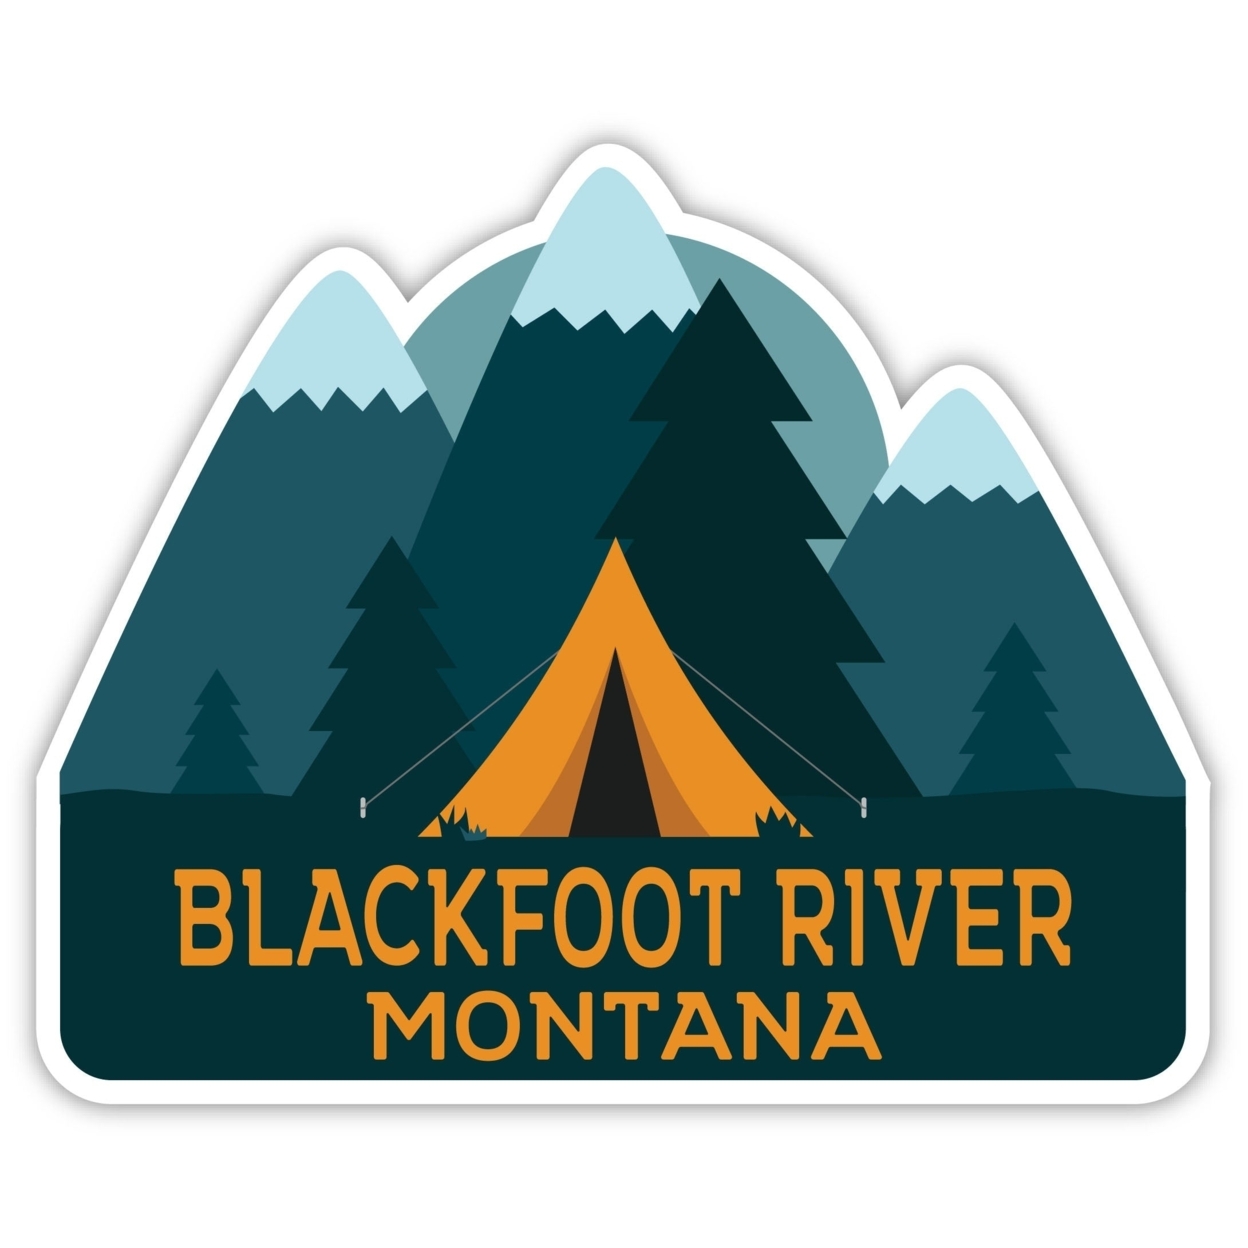 Blackfoot River Montana Souvenir Decorative Stickers (Choose Theme And Size) - 4-Pack, 10-Inch, Tent